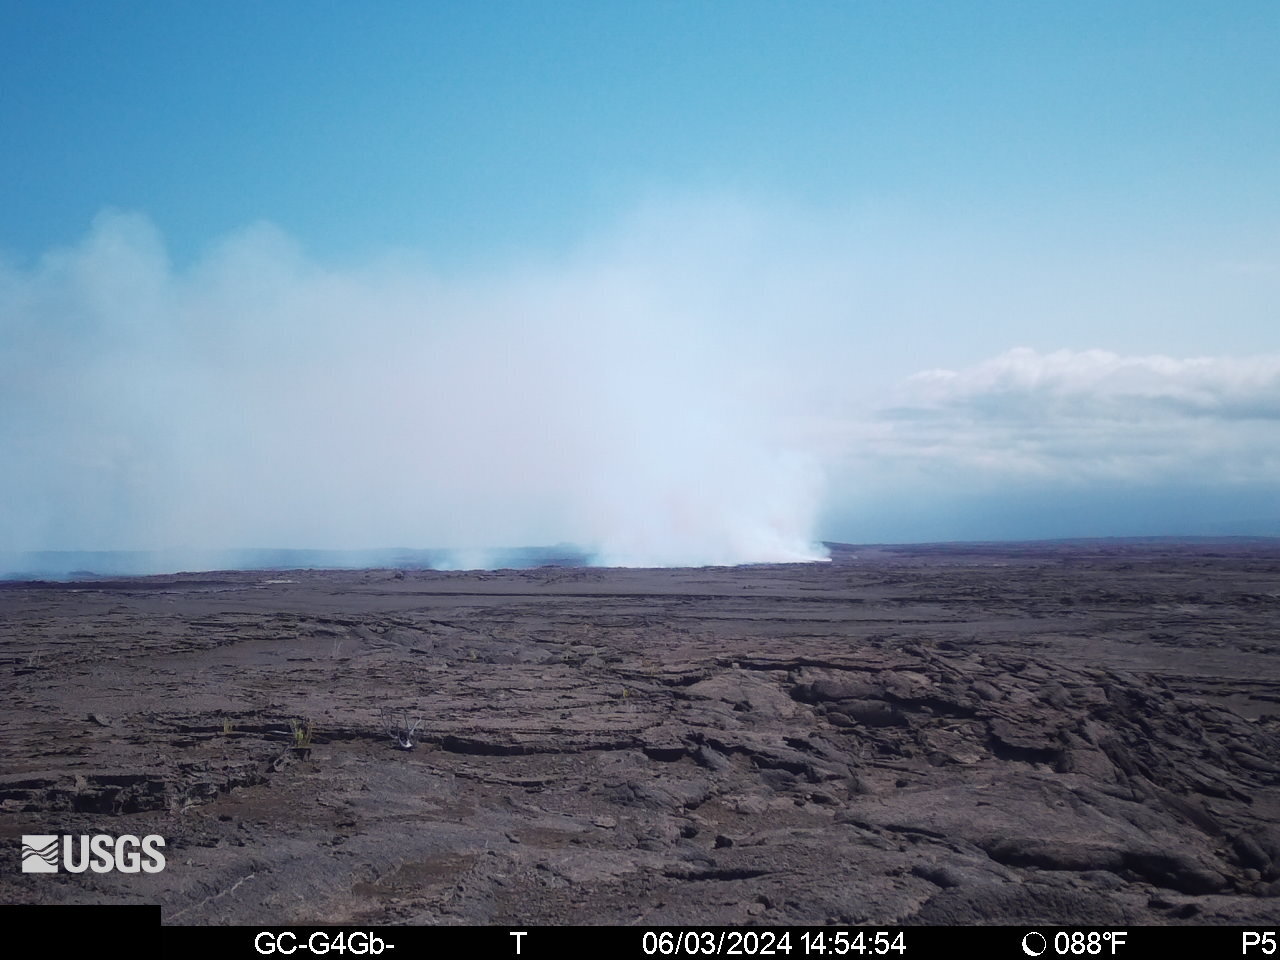 Although the eruption halted, the degassing continues at Kilauea (image: USGS HVO)